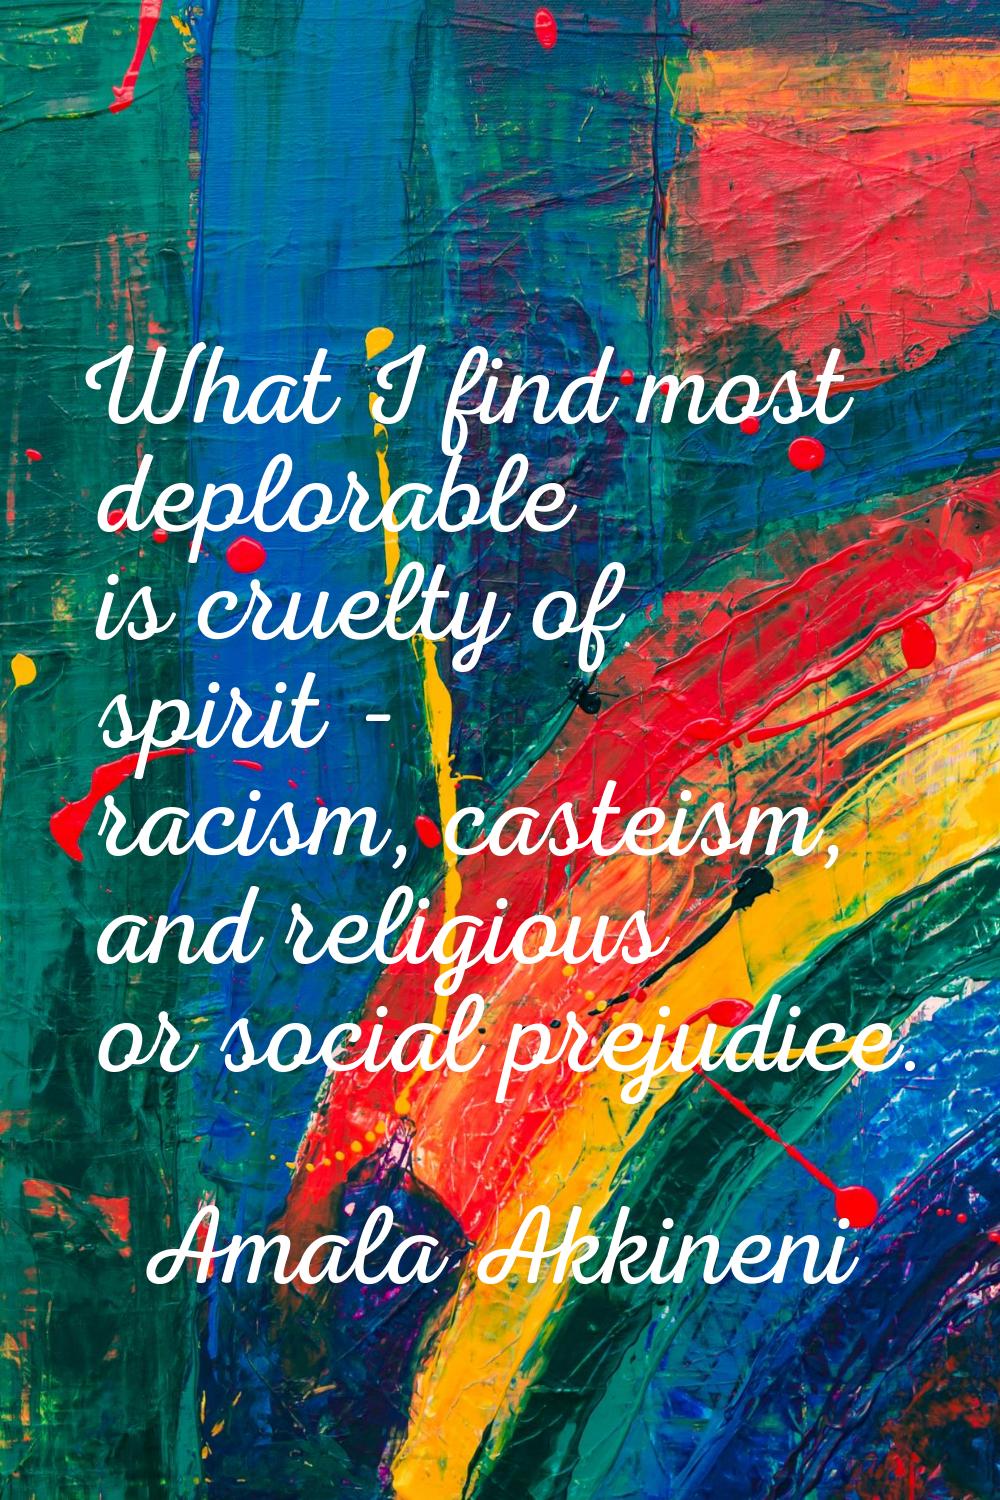 What I find most deplorable is cruelty of spirit - racism, casteism, and religious or social prejud